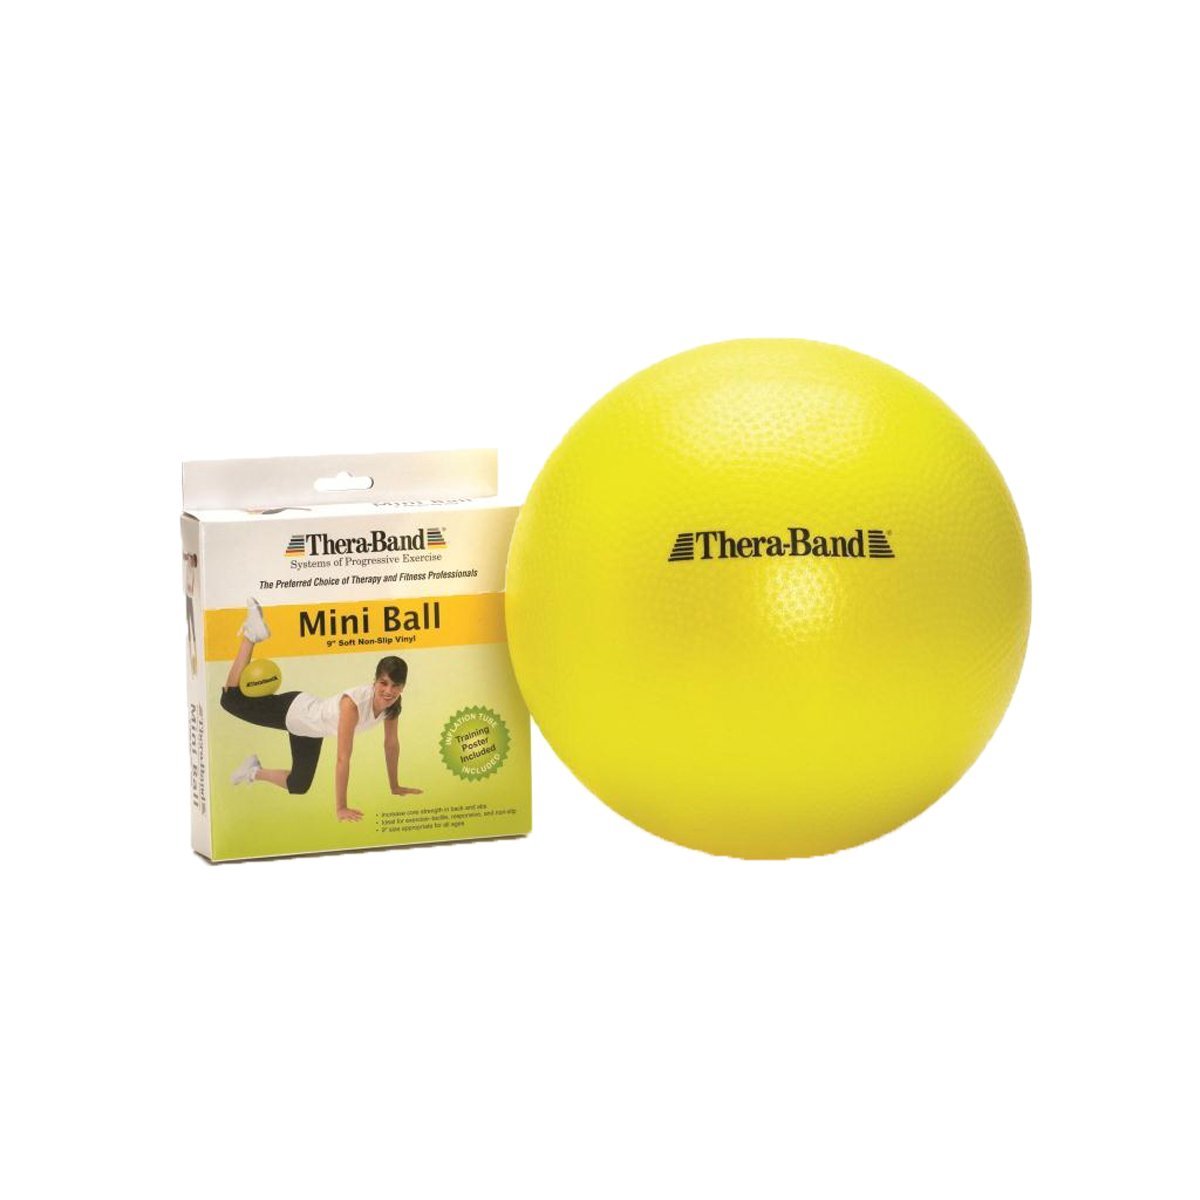 Featured Image for THERABAND Mini Ball, Small Exercise Ball for Yoga, Pilates, Abdominal Workouts, Shoulder Therapy, Core Strengthening, At-Home Gym & Physical Therapy Tool